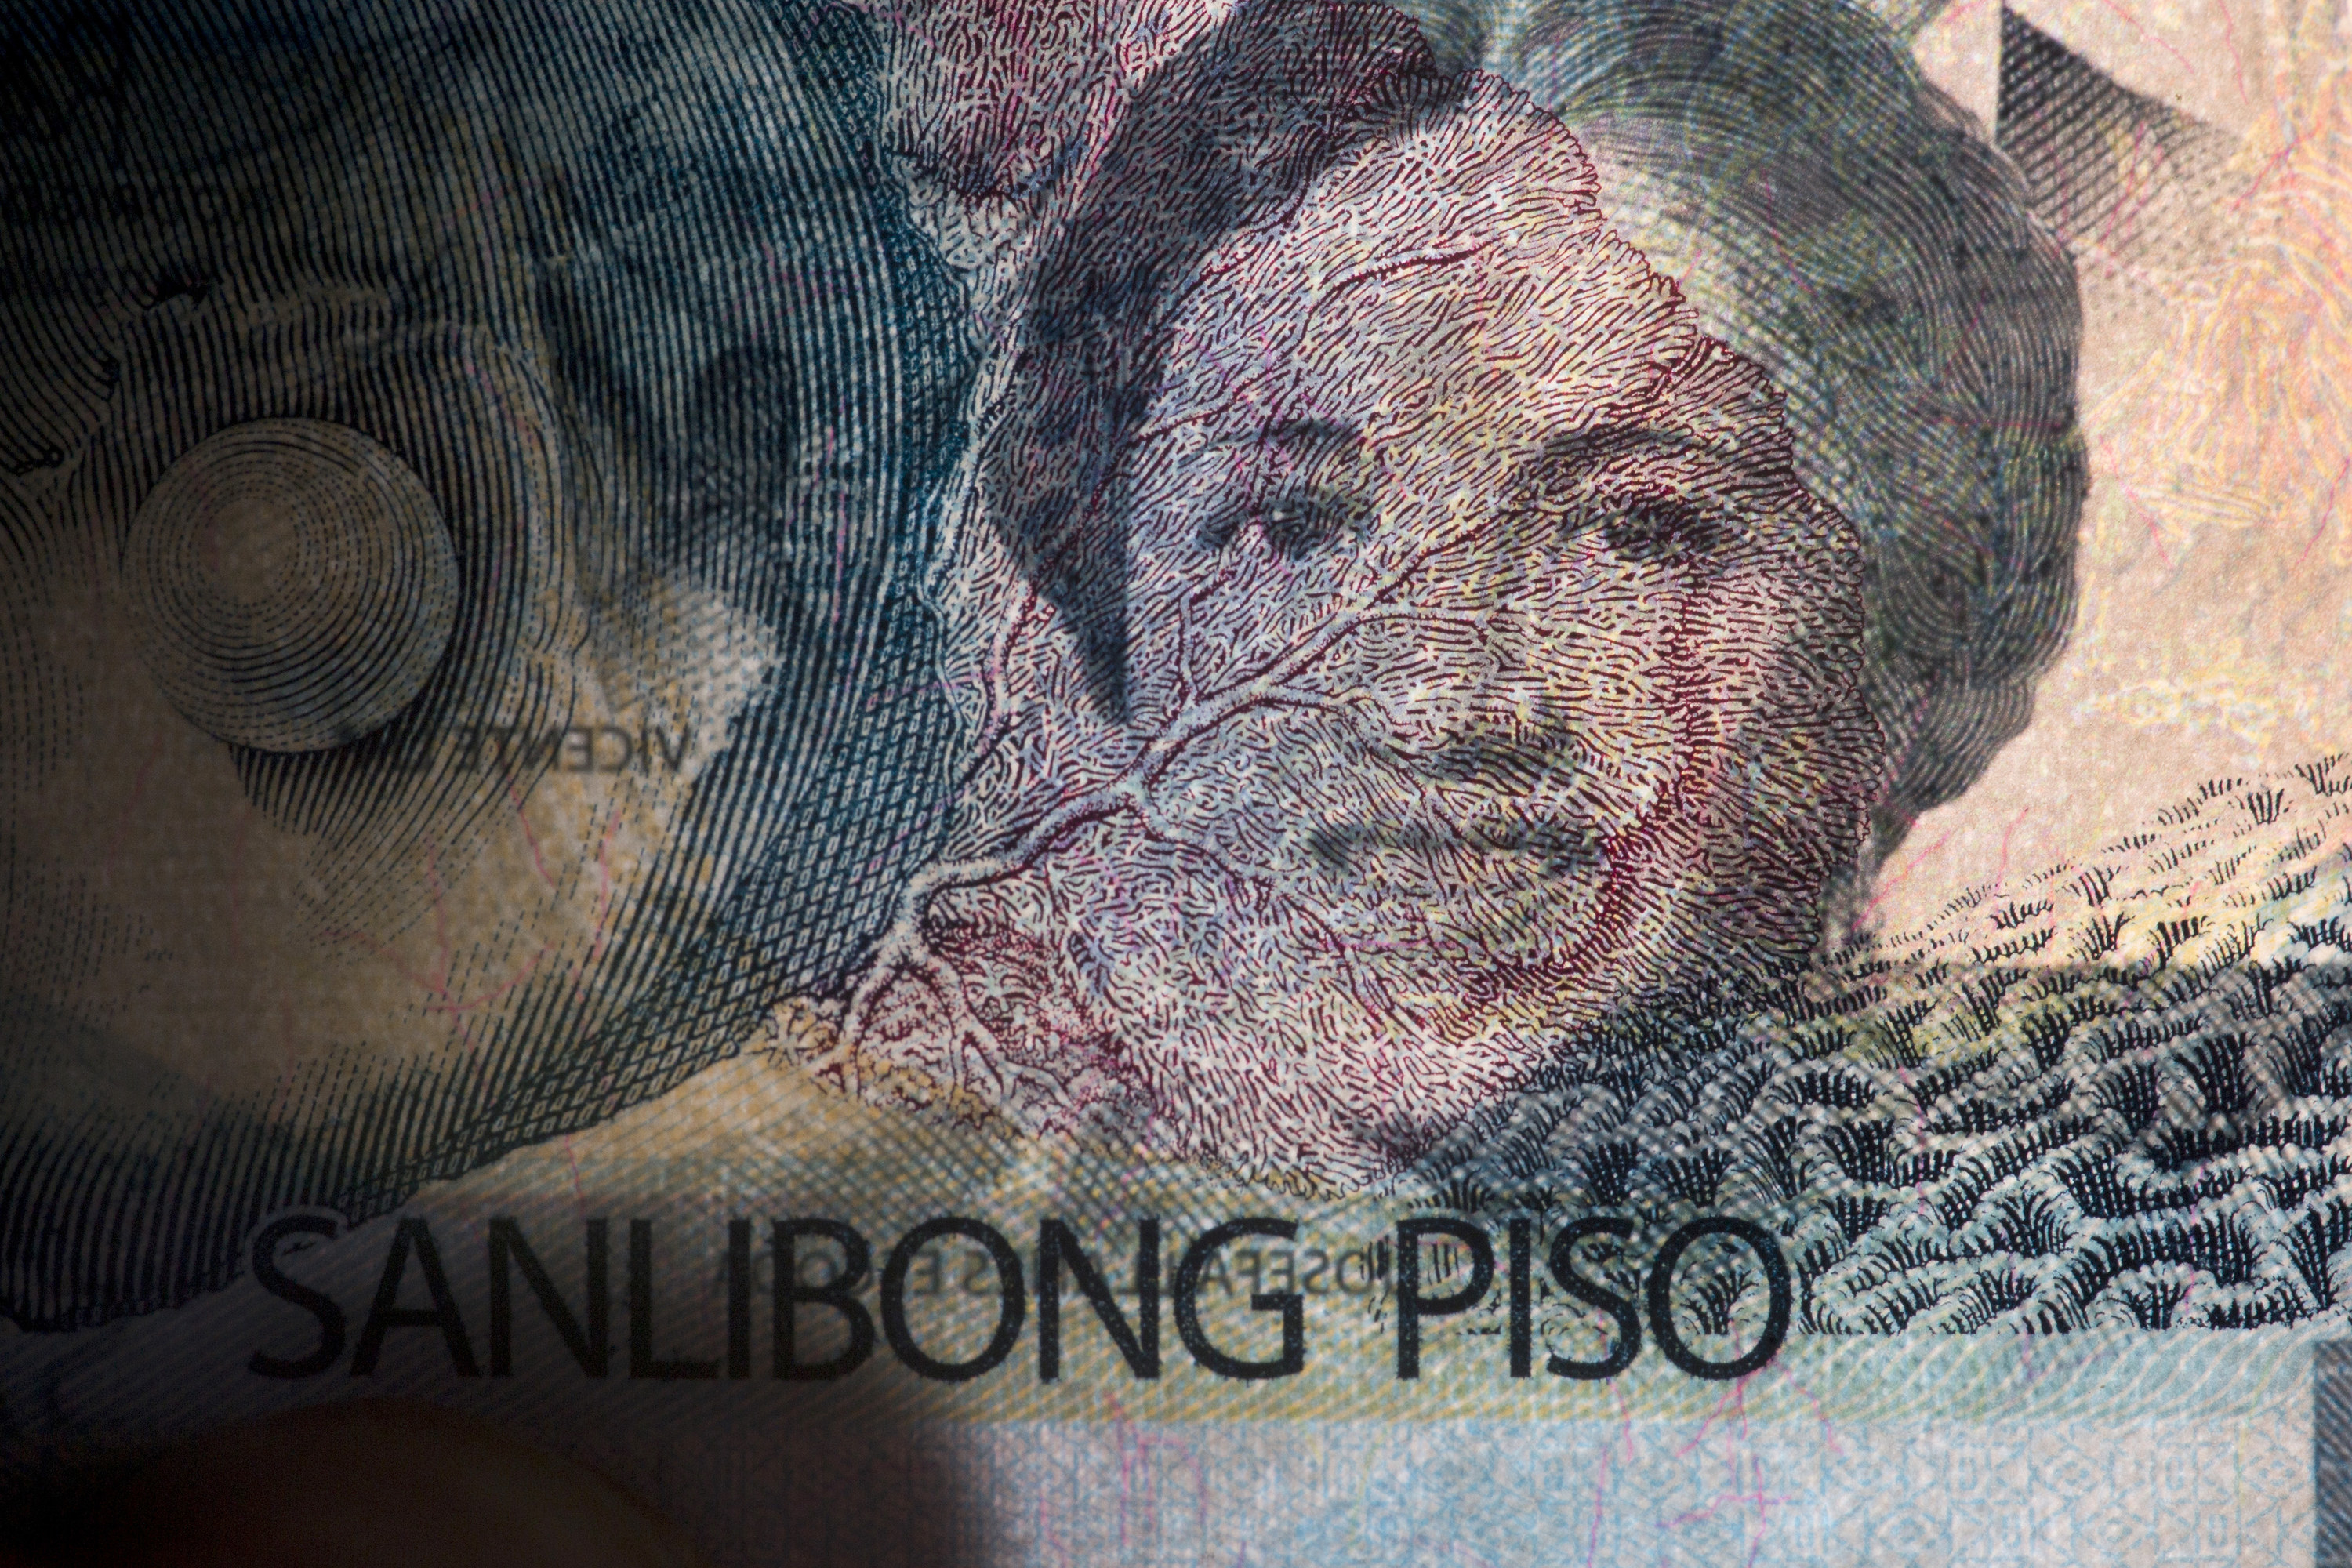 image of josefa on a piece of currency